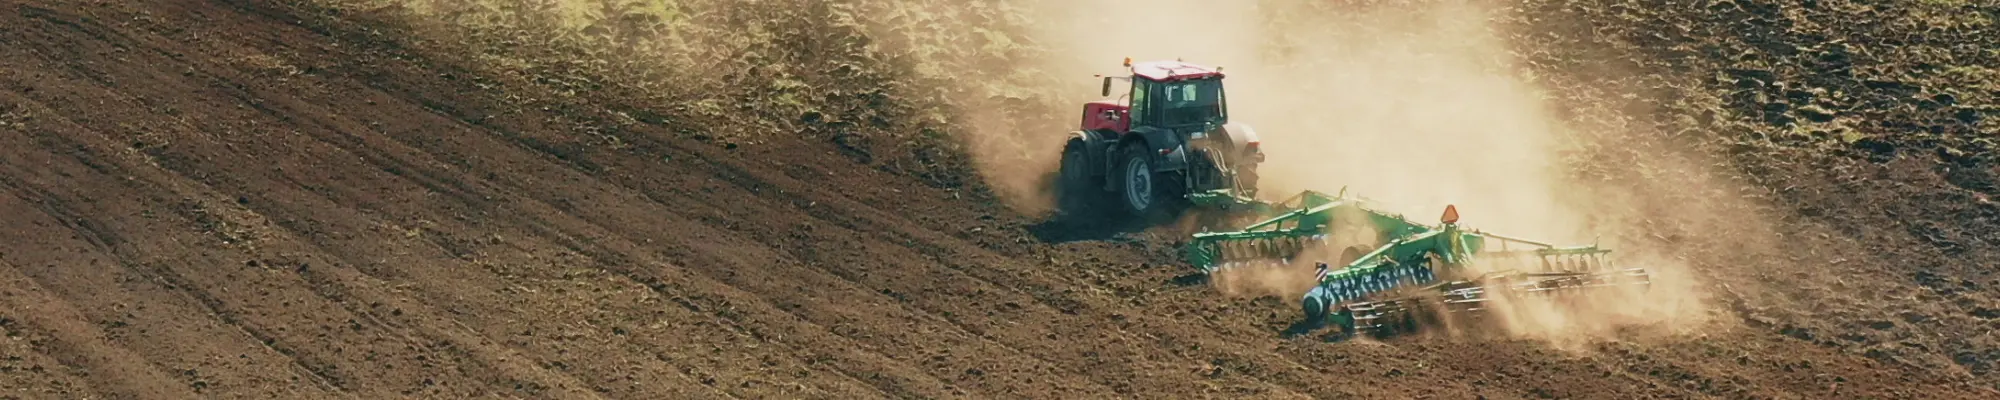 Tractor in action on the farm – Promoting eco-conscious agriculture with World Climate Farm Tool